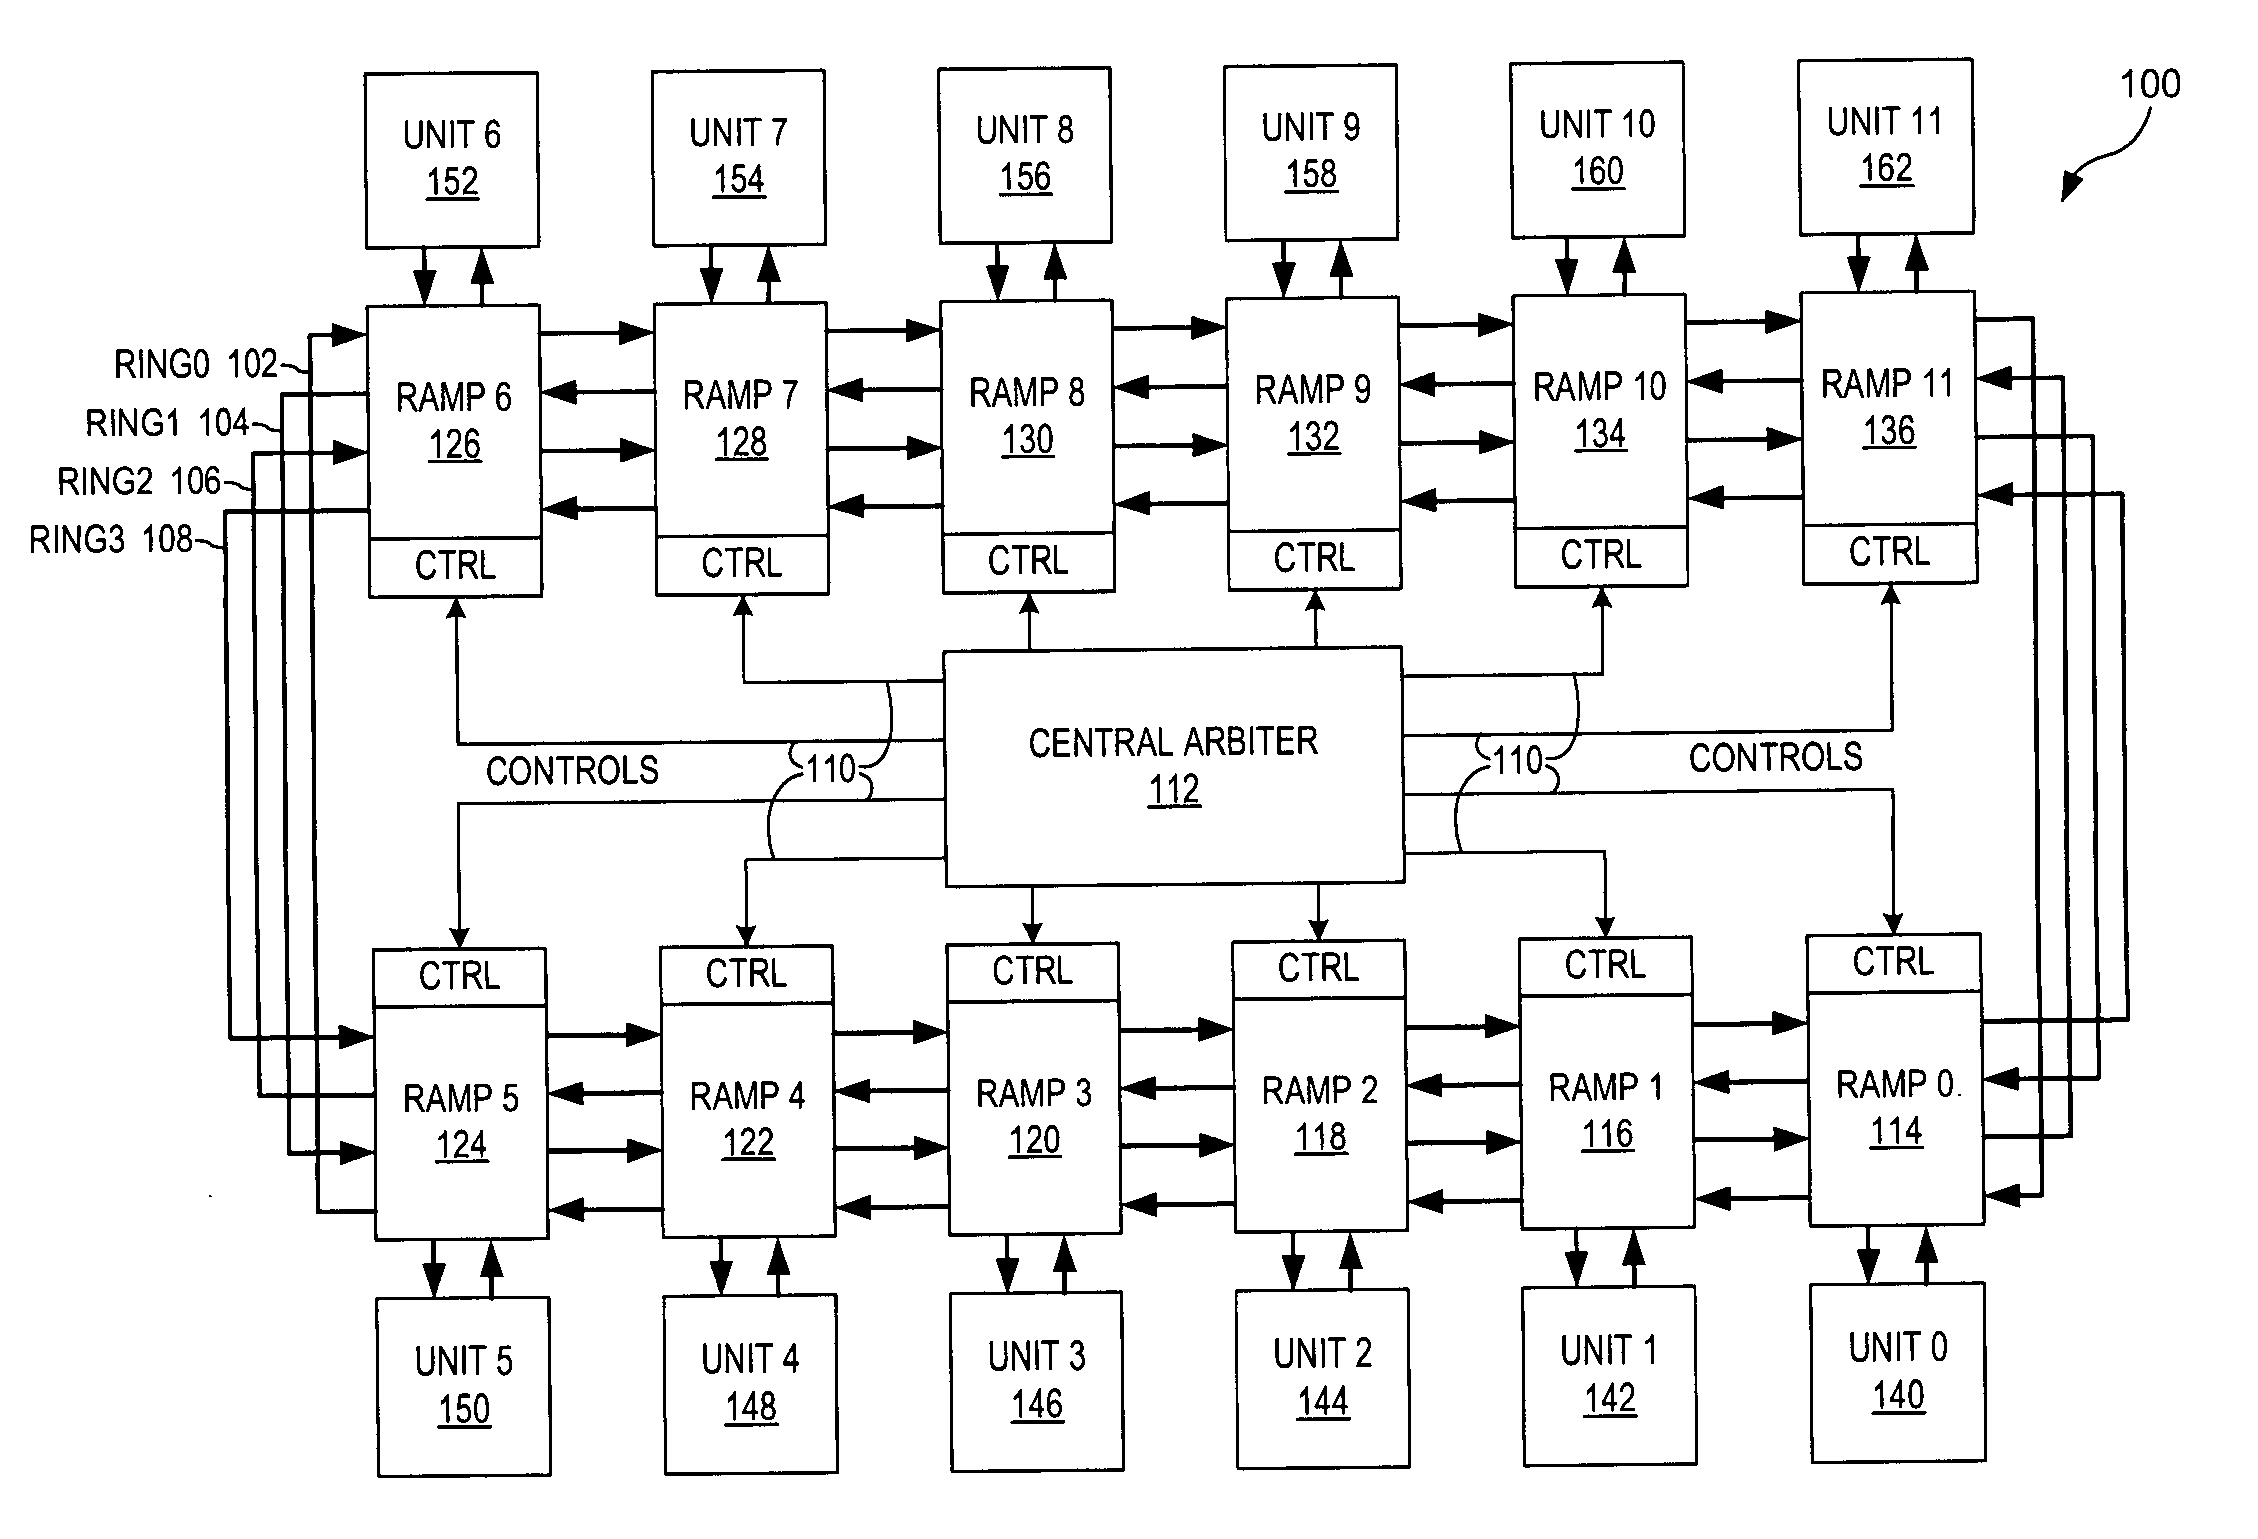 Single port/multiple ring implementation of a hybrid crossbar partially non-blocking data switch